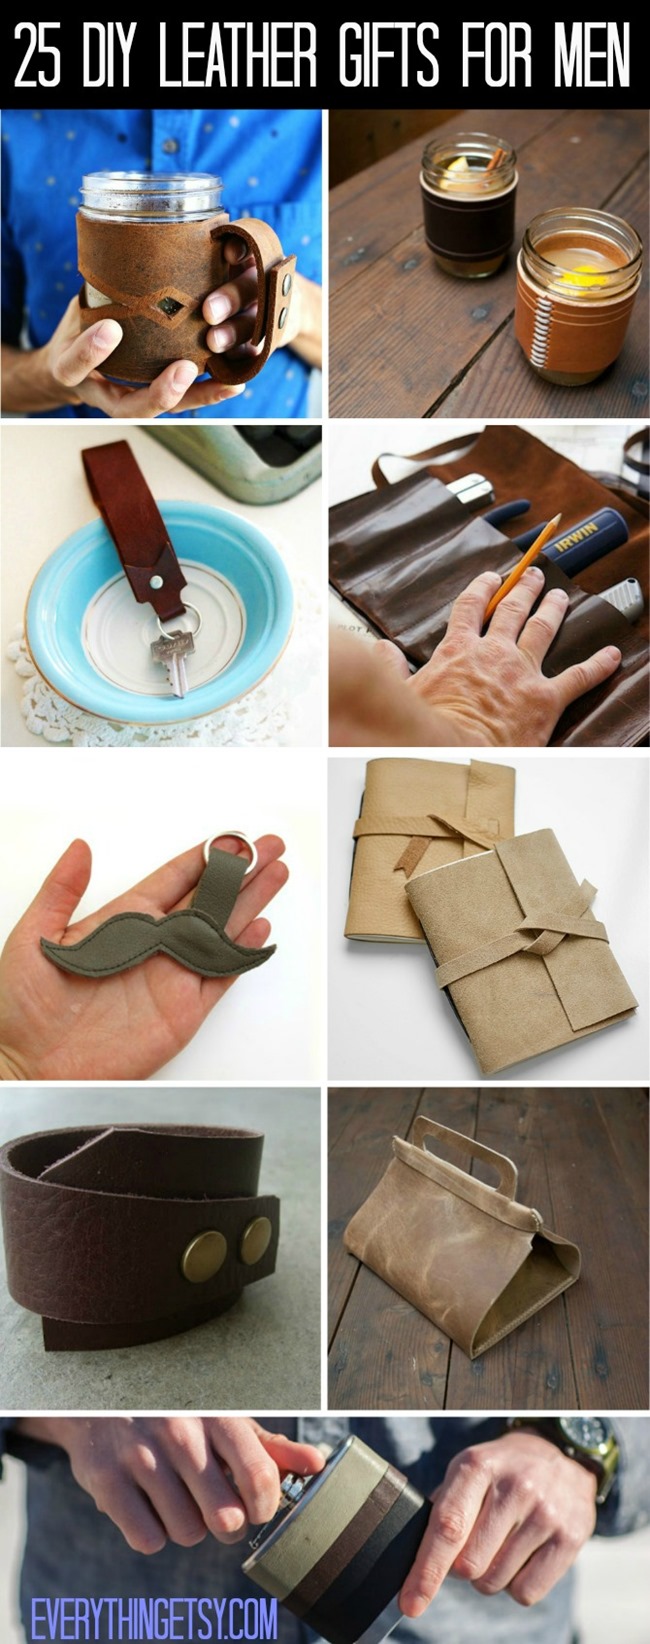 25 DIY Leather Gifts for Men - Tutorials at EverythingEtsy.com